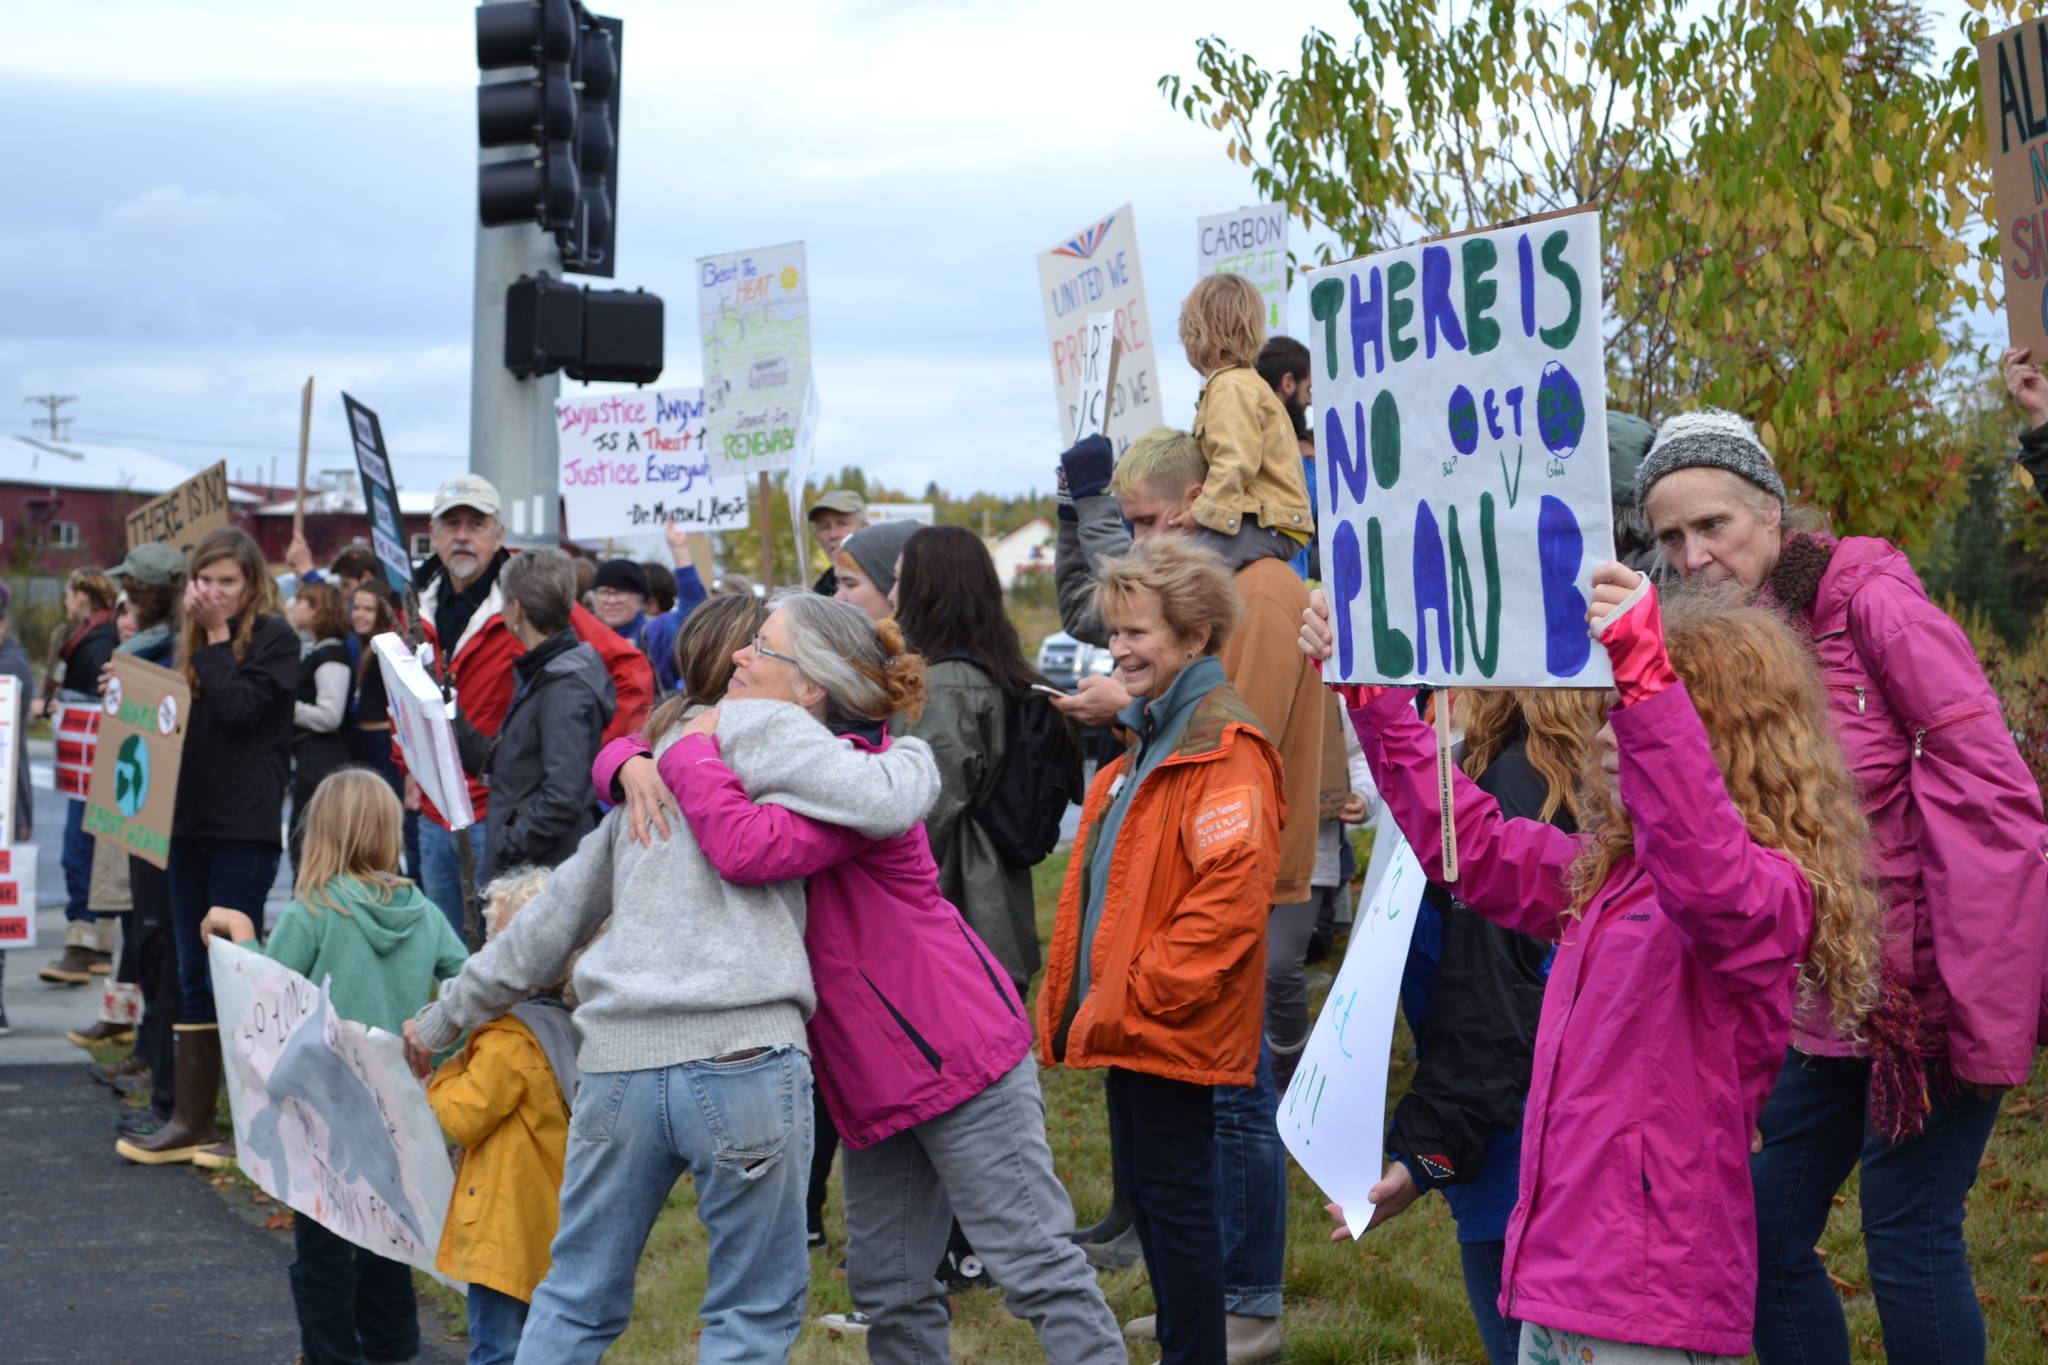 Participants in the Soldotna Climate Strike hold signs at the intersection of the Sterling Highway and the Kenai Spur Highway in Soldotna, Alaska on Sept. 20, 2019. (Photo by Brian Mazurek/Peninsula Clarion)